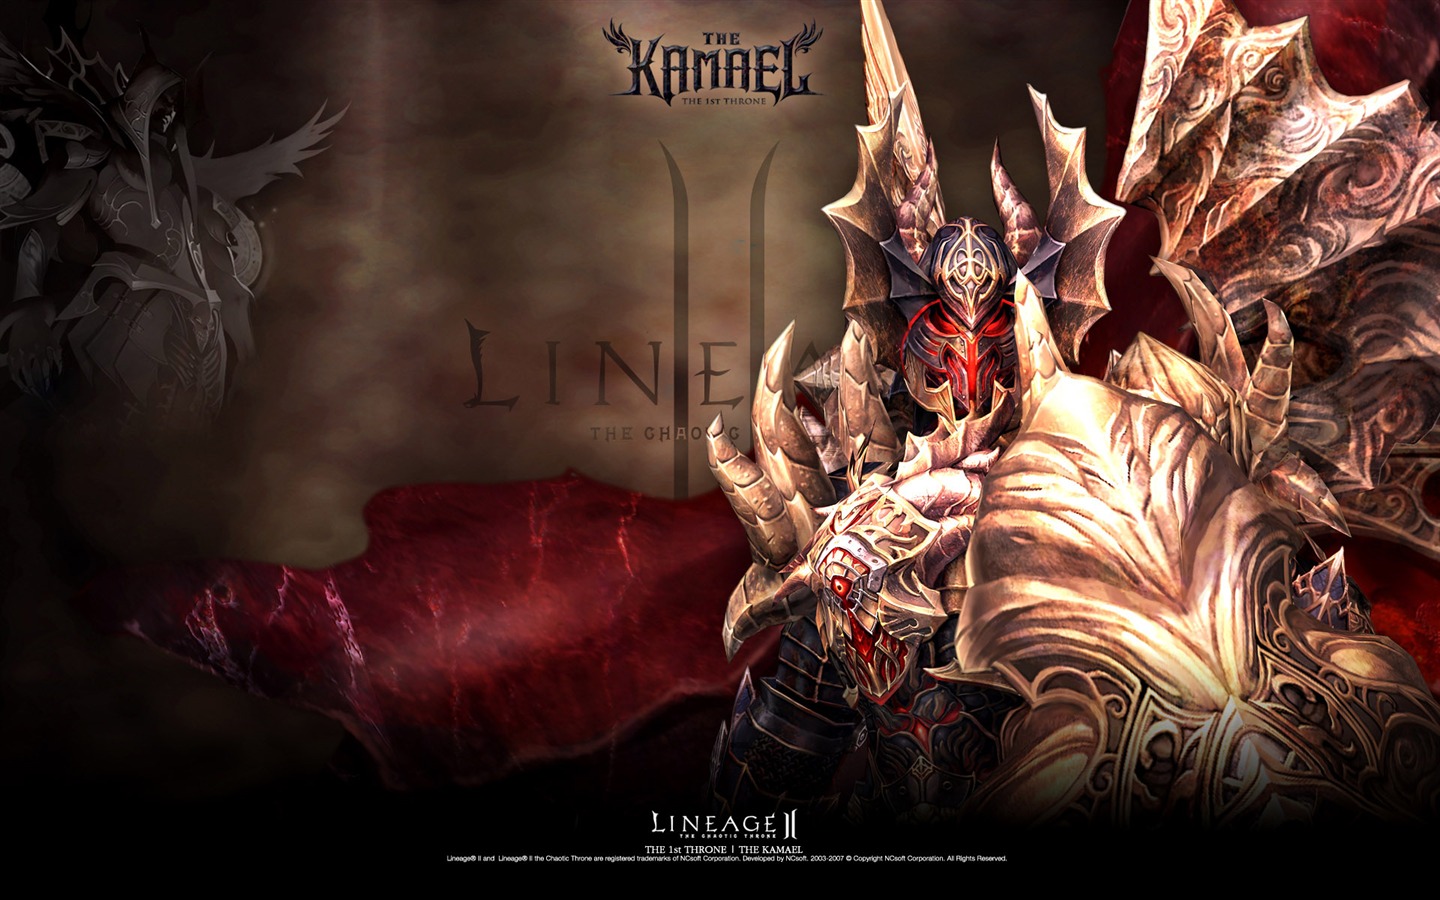 LINEAGE Ⅱ Modellierung HD-Gaming-Wallpaper #11 - 1440x900